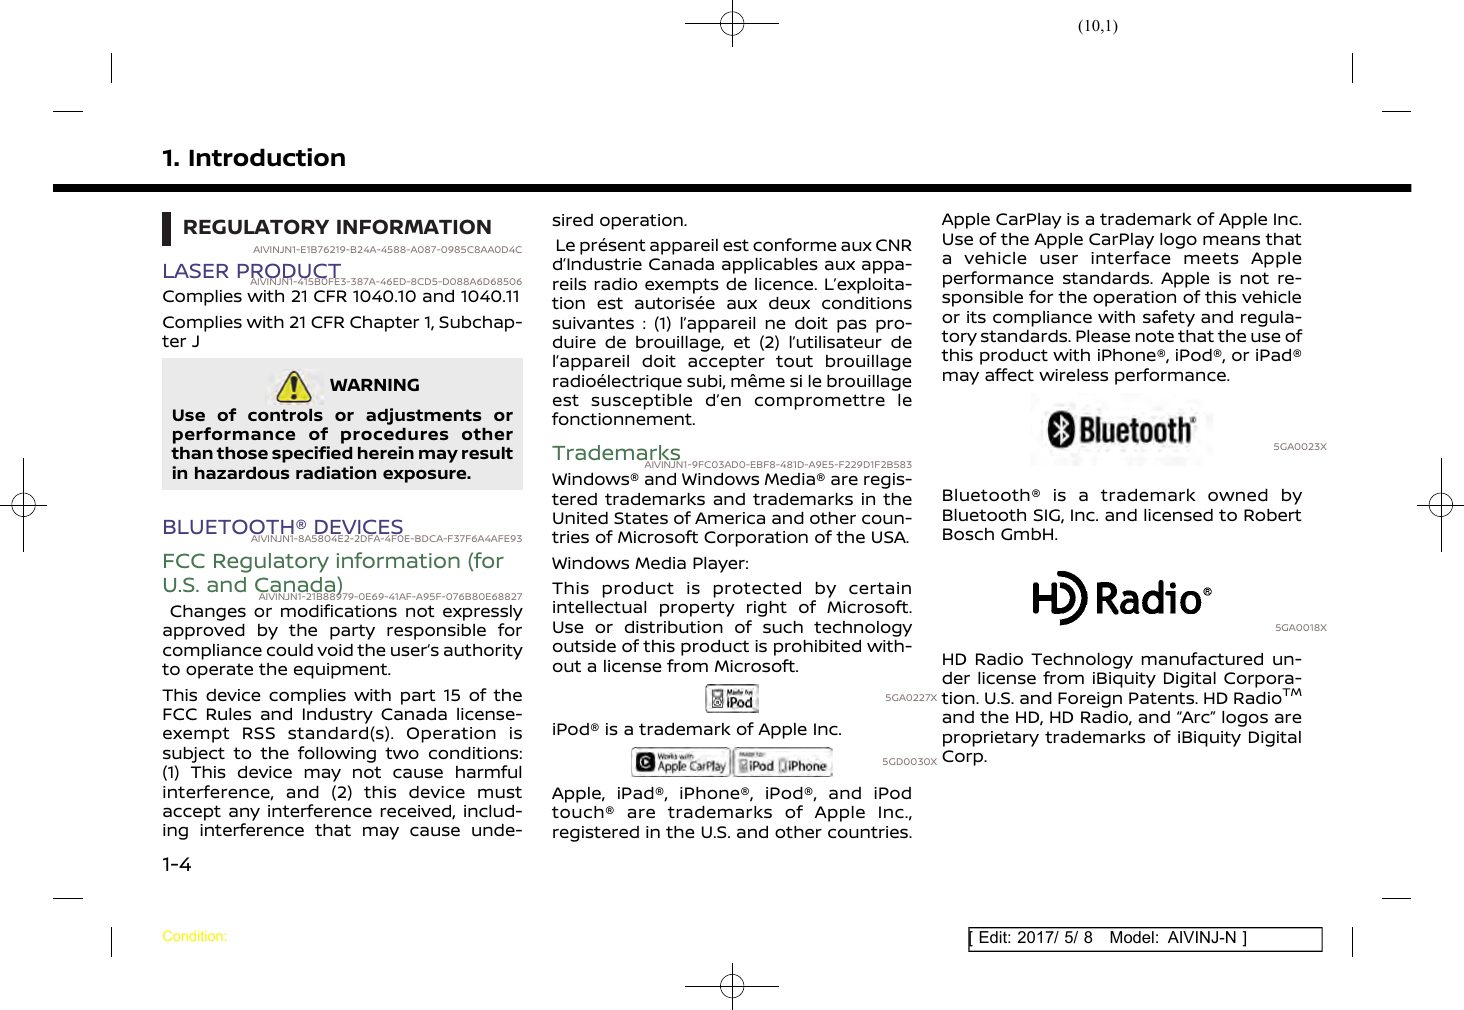 Page 10 of Robert Bosch Car Multimedia AIVICMFB0 Navigation System with Bluetooth and WLAN User Manual